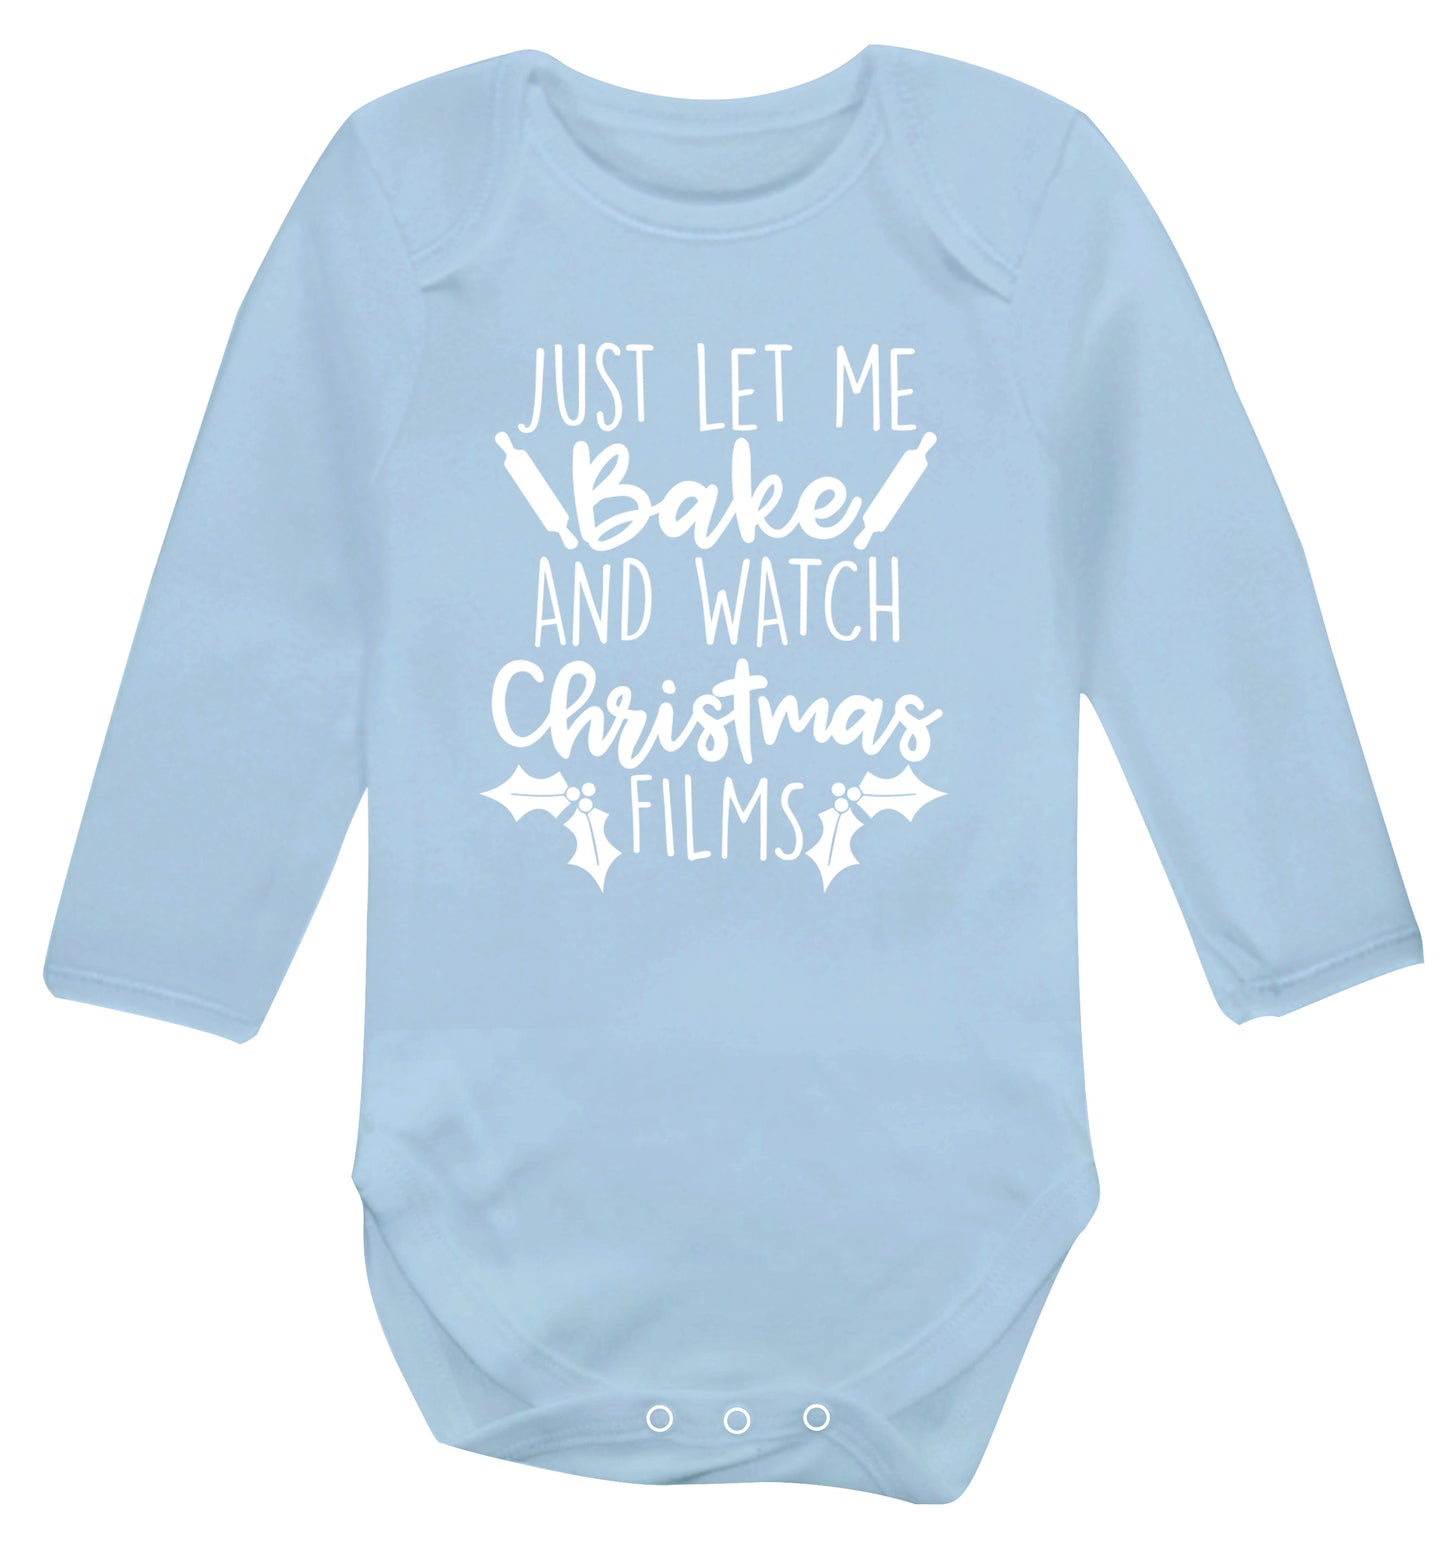 Just let me bake and watch Christmas films Baby Vest long sleeved pale blue 6-12 months